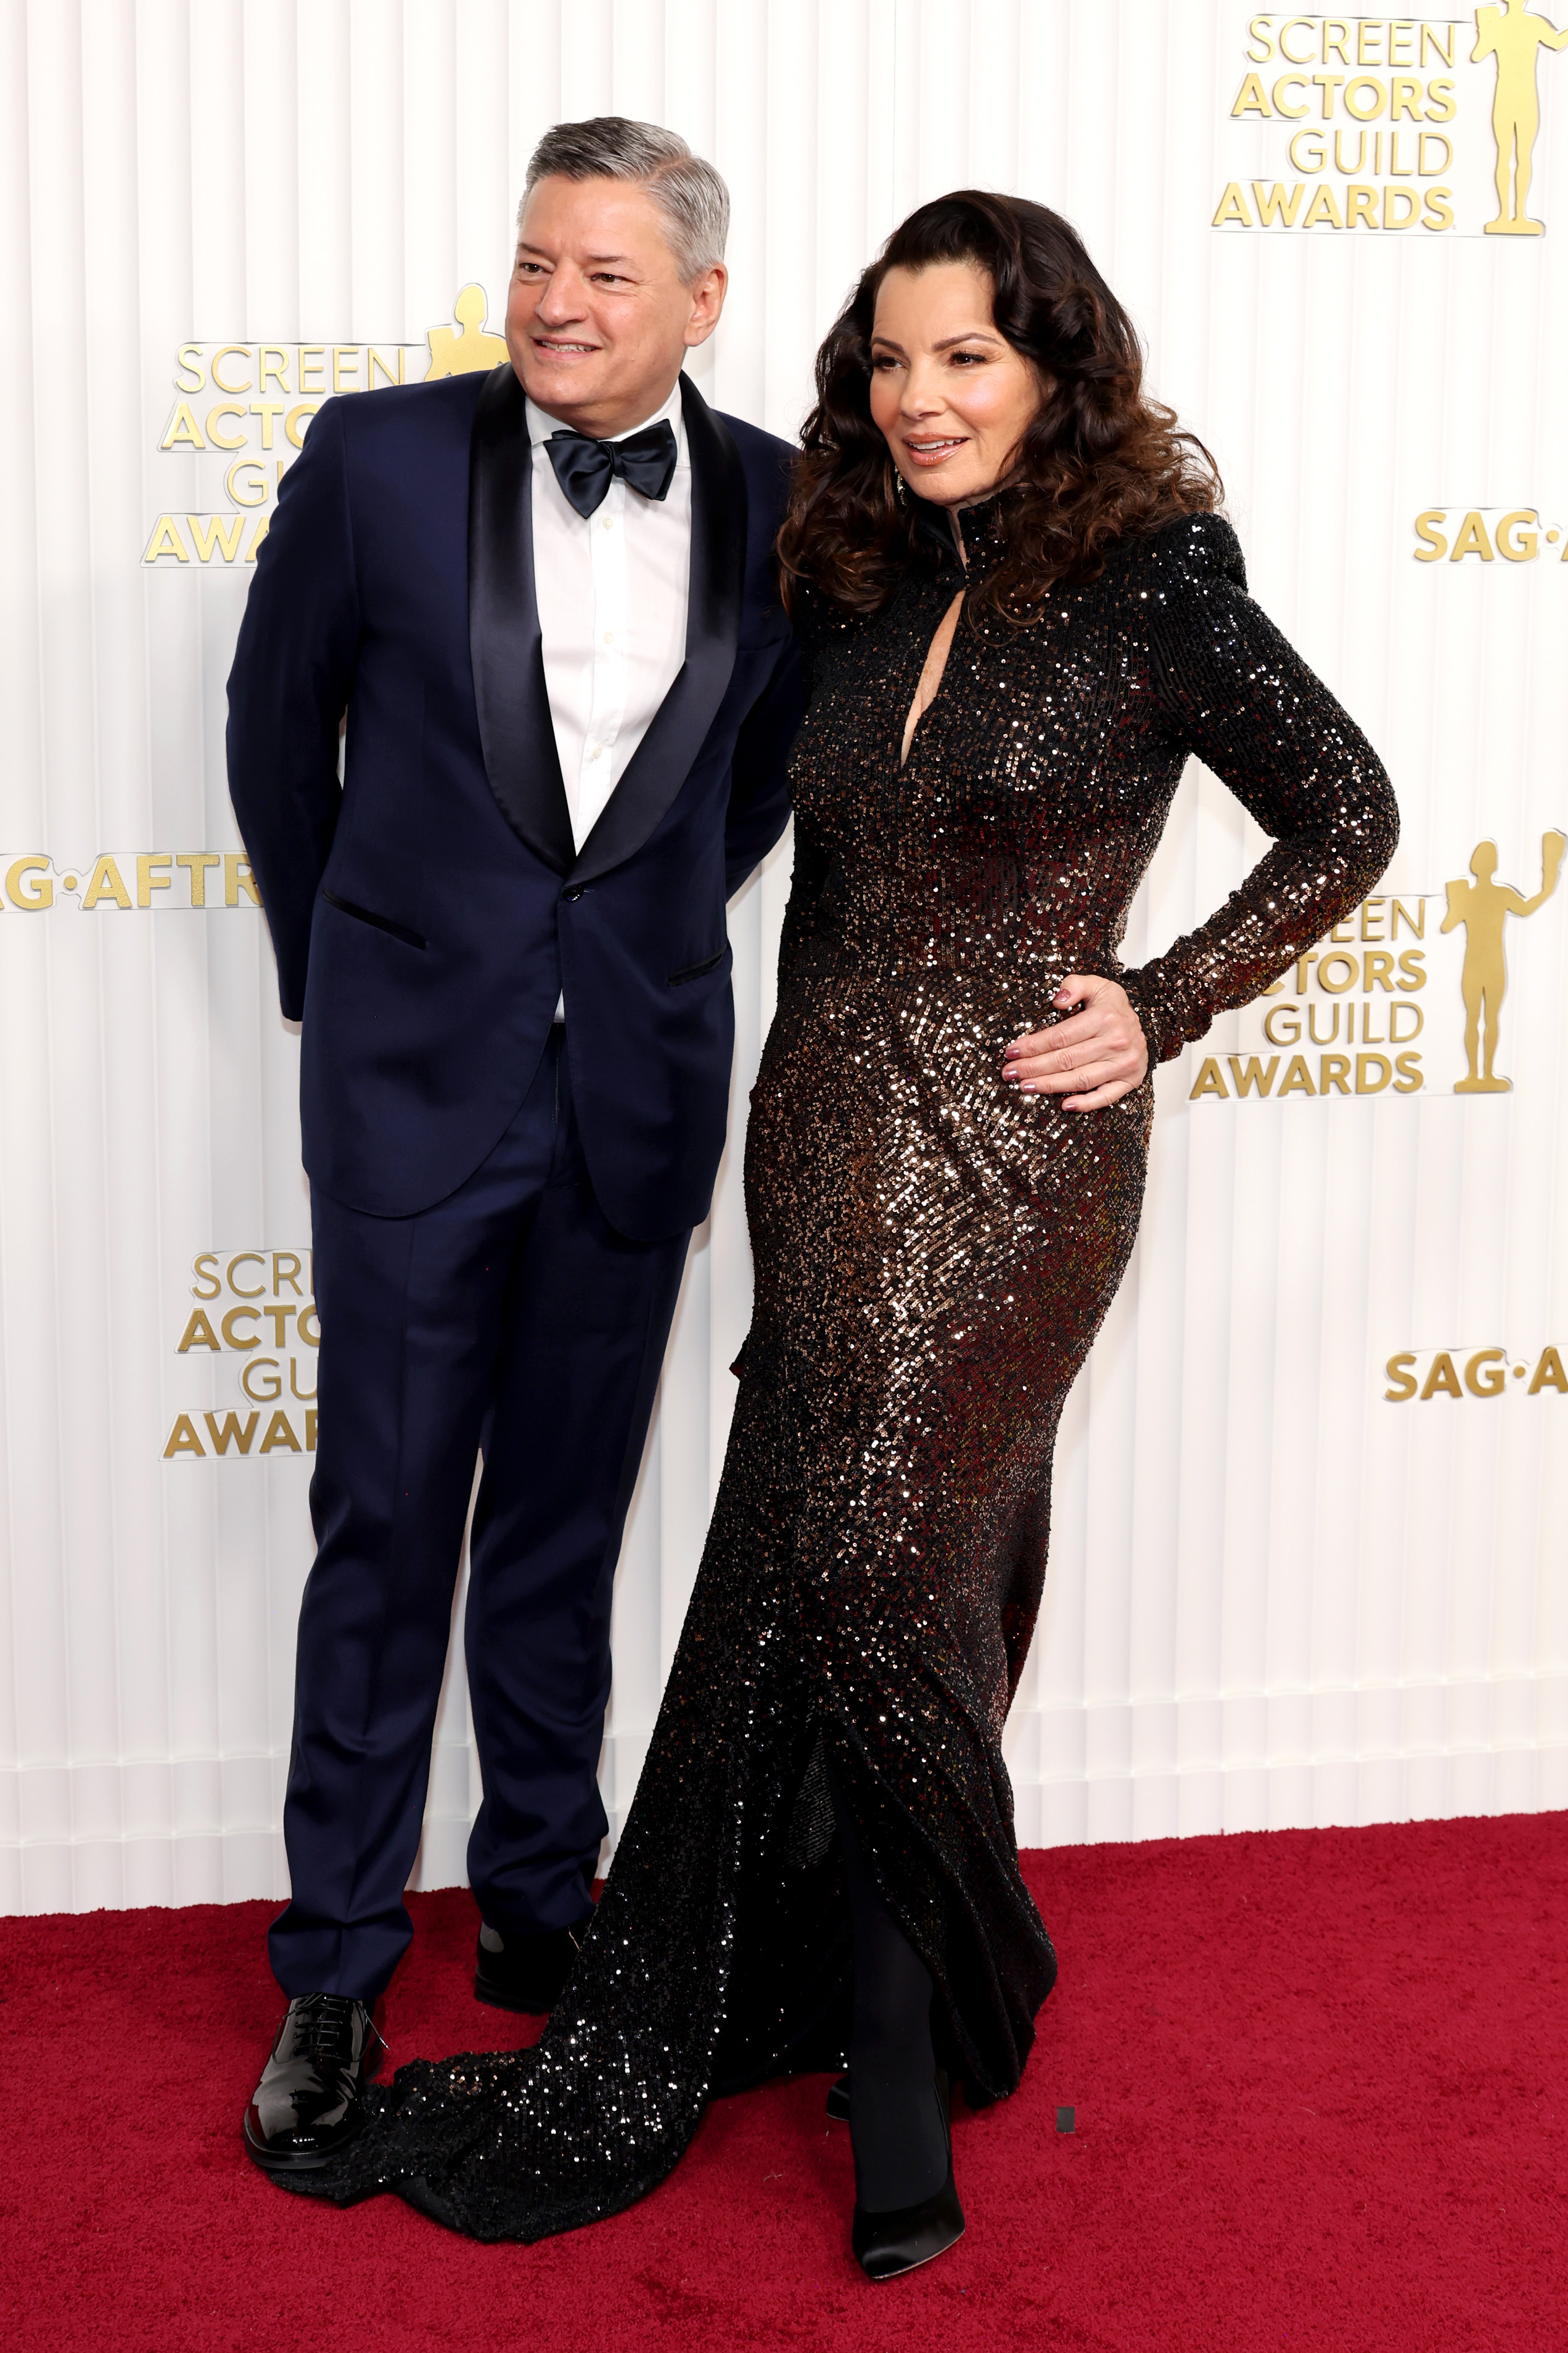 Ted Sarandos and Fran Drescher at the 29th Annual Screen Actors Guild Awards held at Fairmont Century Plaza in Los Angeles, California, on February 26, 2023. | Source: Getty Images